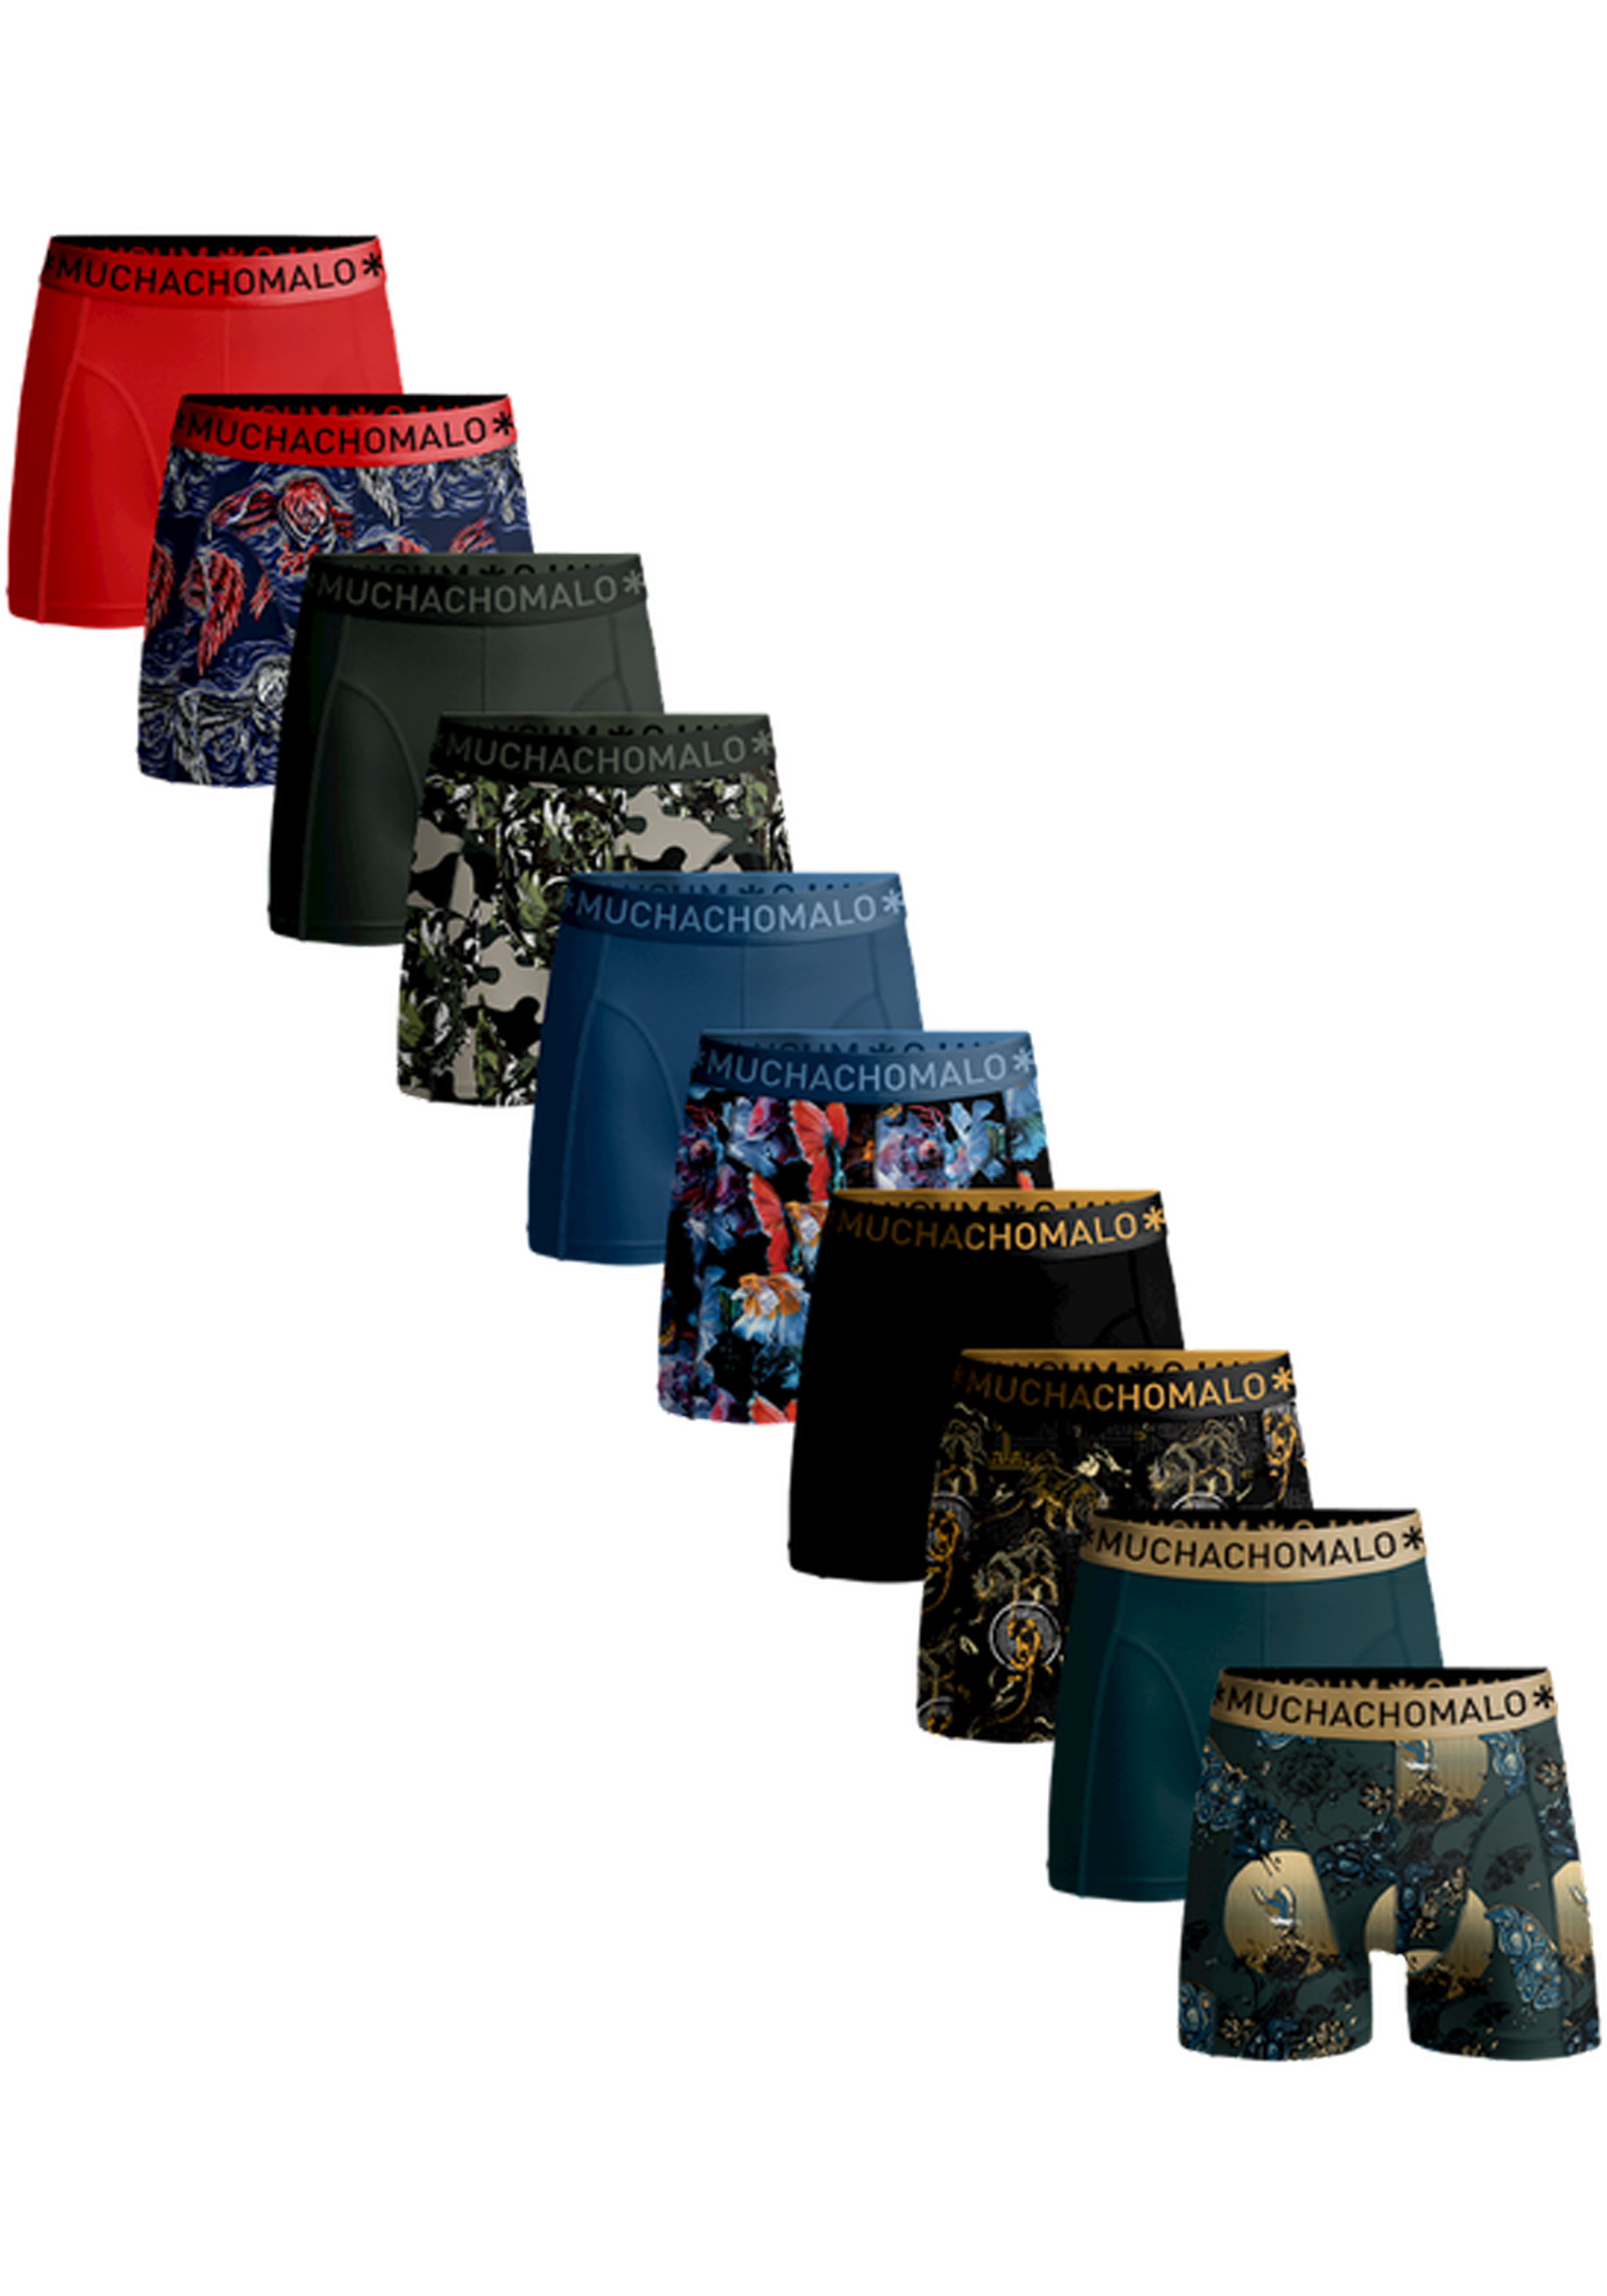 Muchachomalo boxershorts, heren boxers normale lengte (10-pack), Print/solid